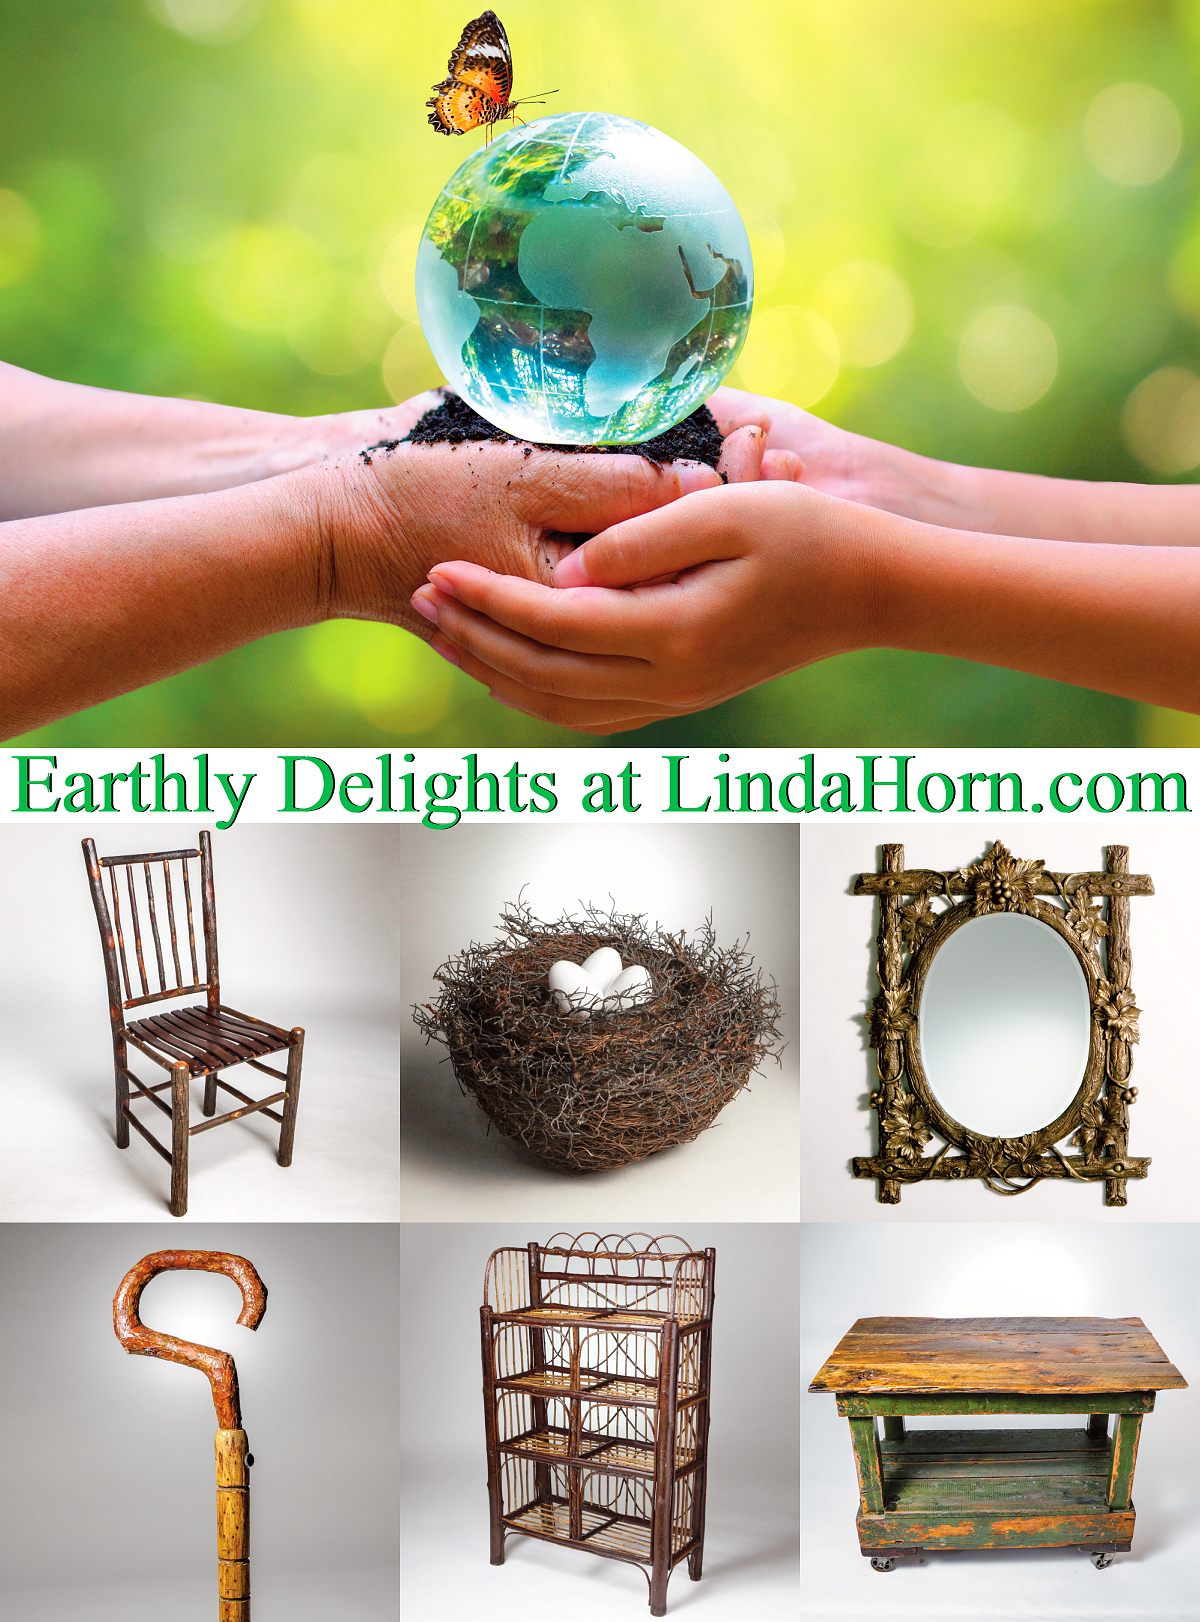 Earthly Delights at LindaHorn.com